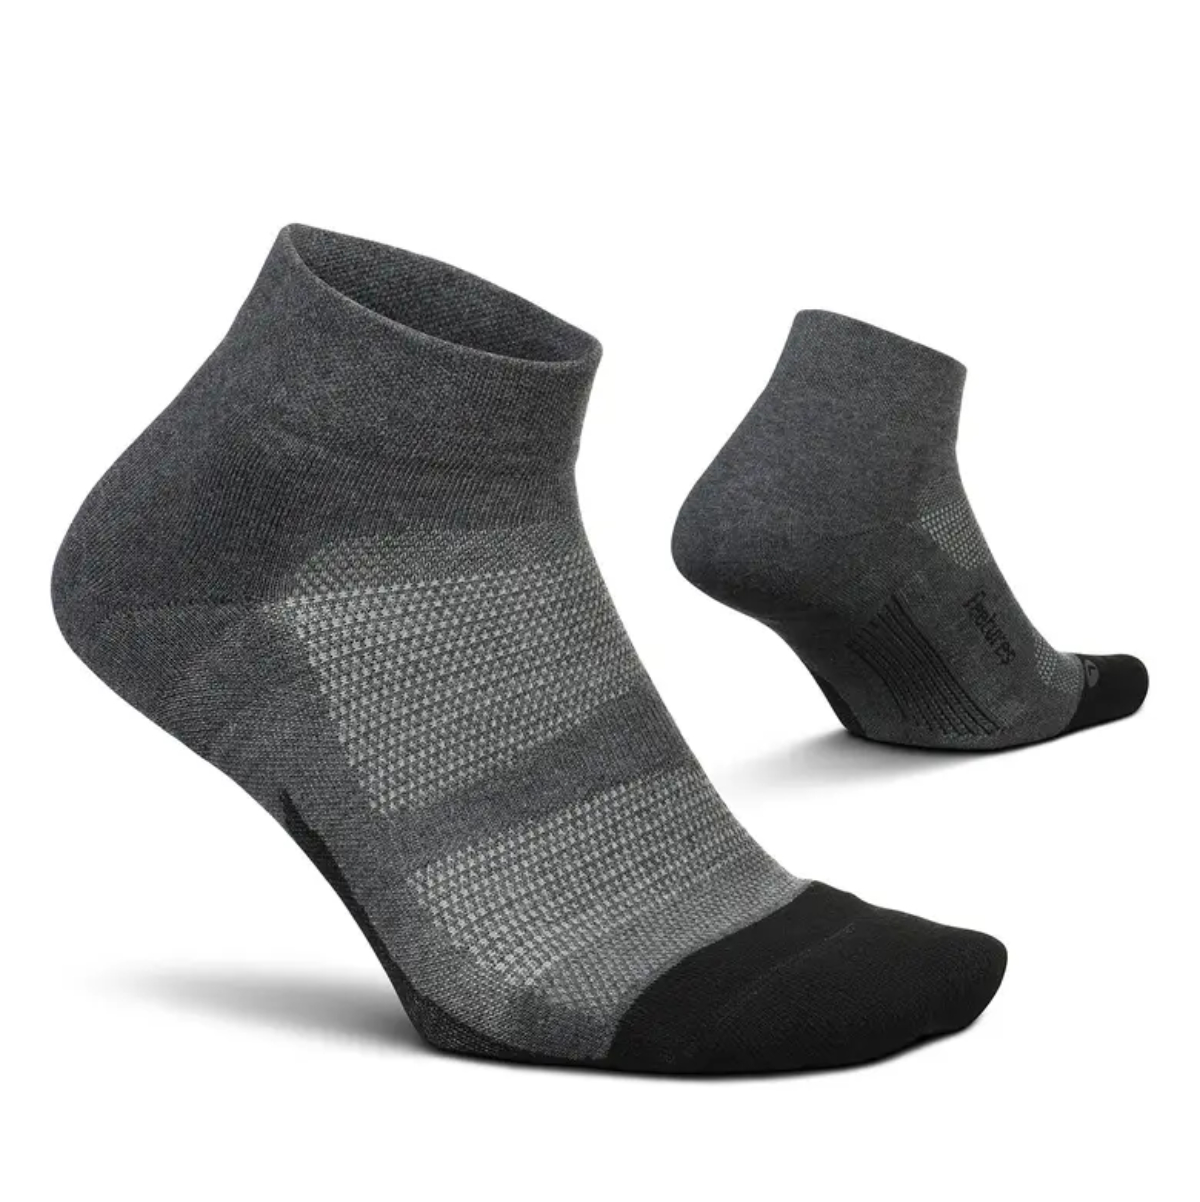 Best Padded Socks for Knee and Foot Pain | Us Weekly